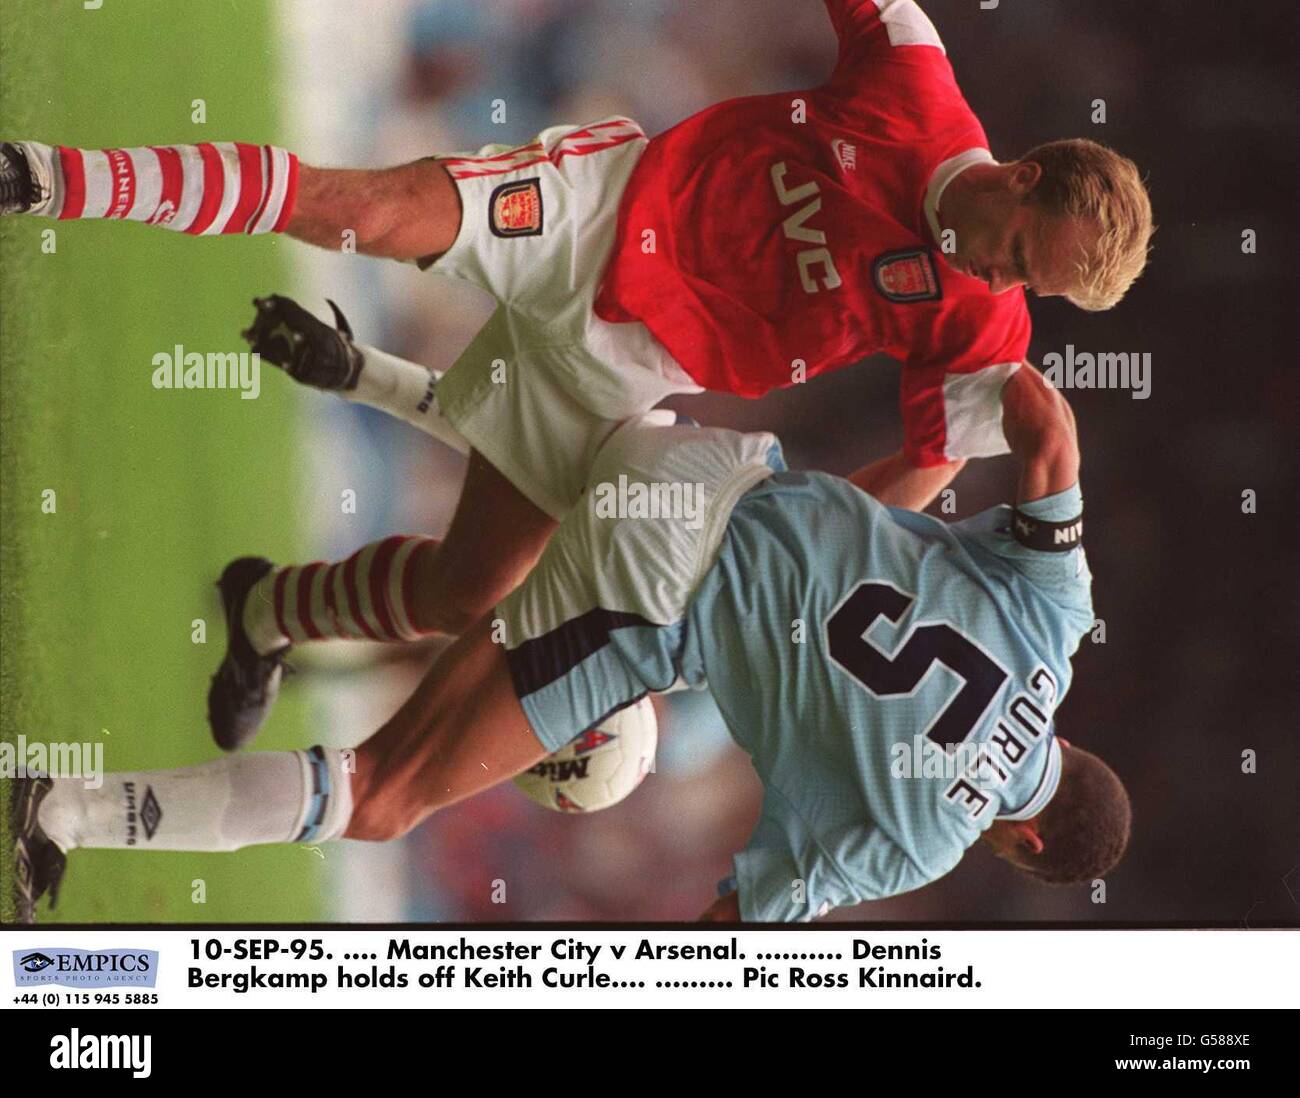 10-SEP-95. Manchester City v Arsenal. Dennis Bergkamp holds off Keith Curle Stock Photo